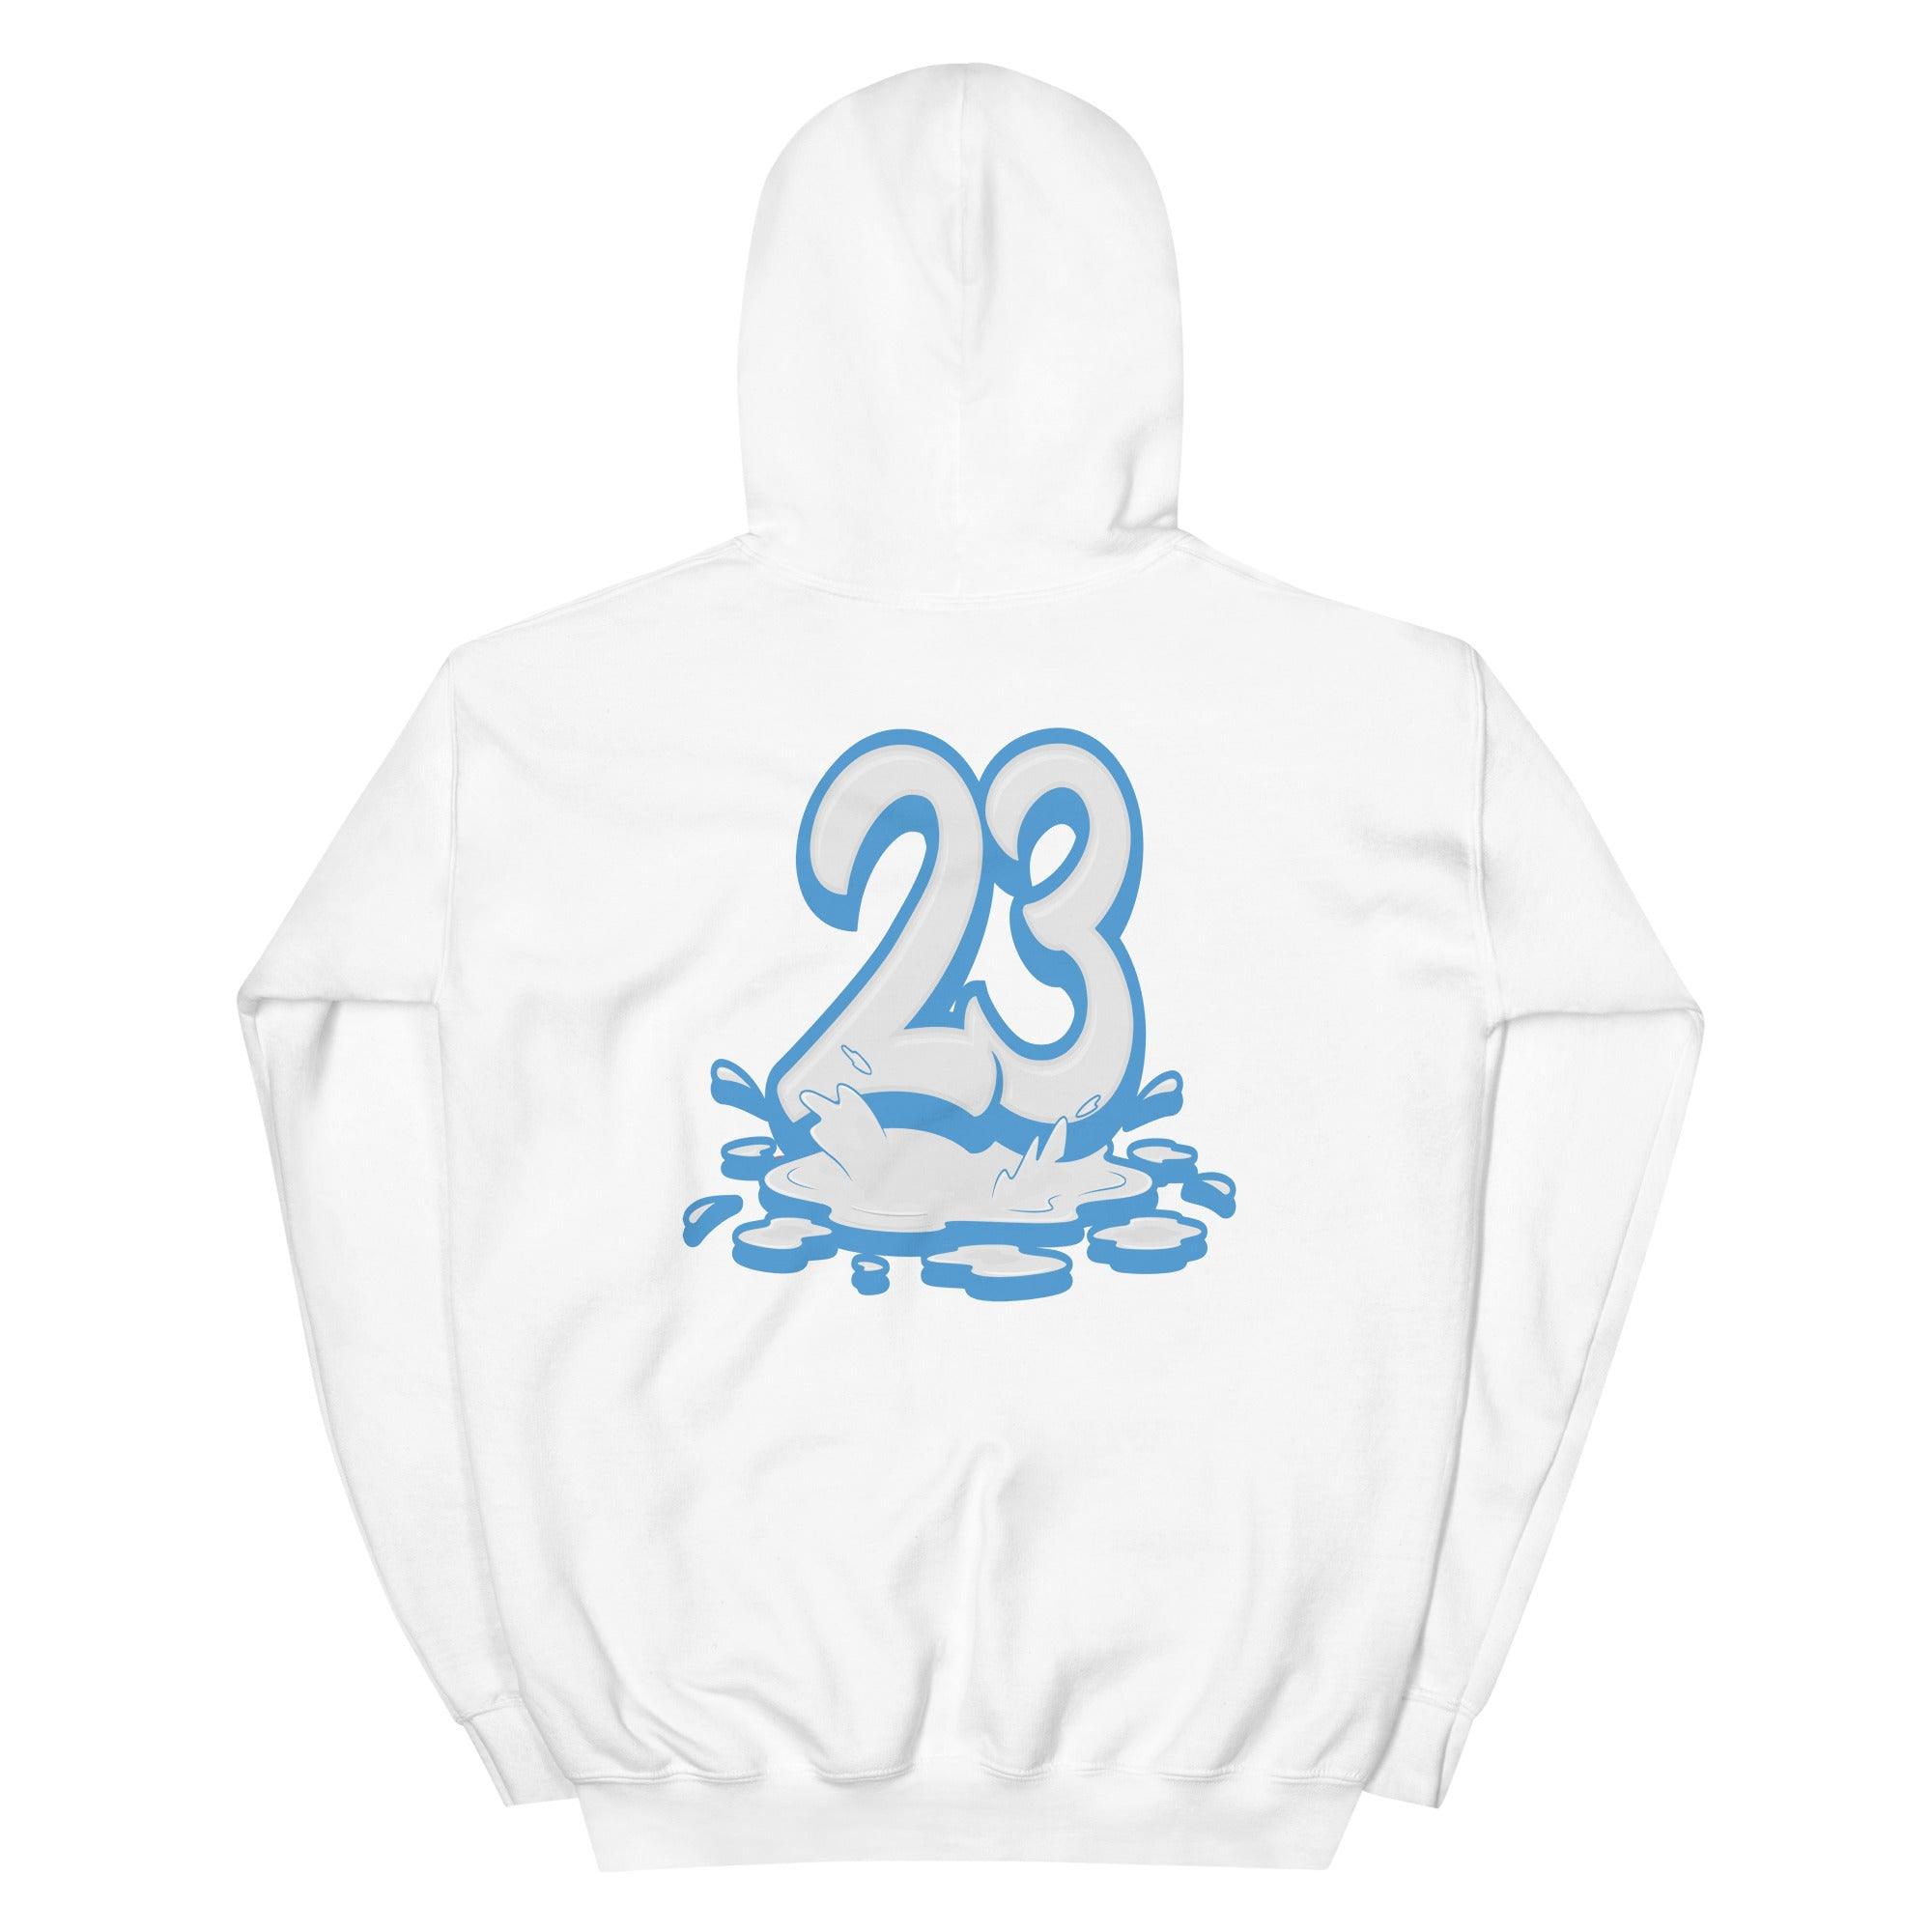 Number 23 Melting Hoodie Nike Air Force 1 High White University Blue photo